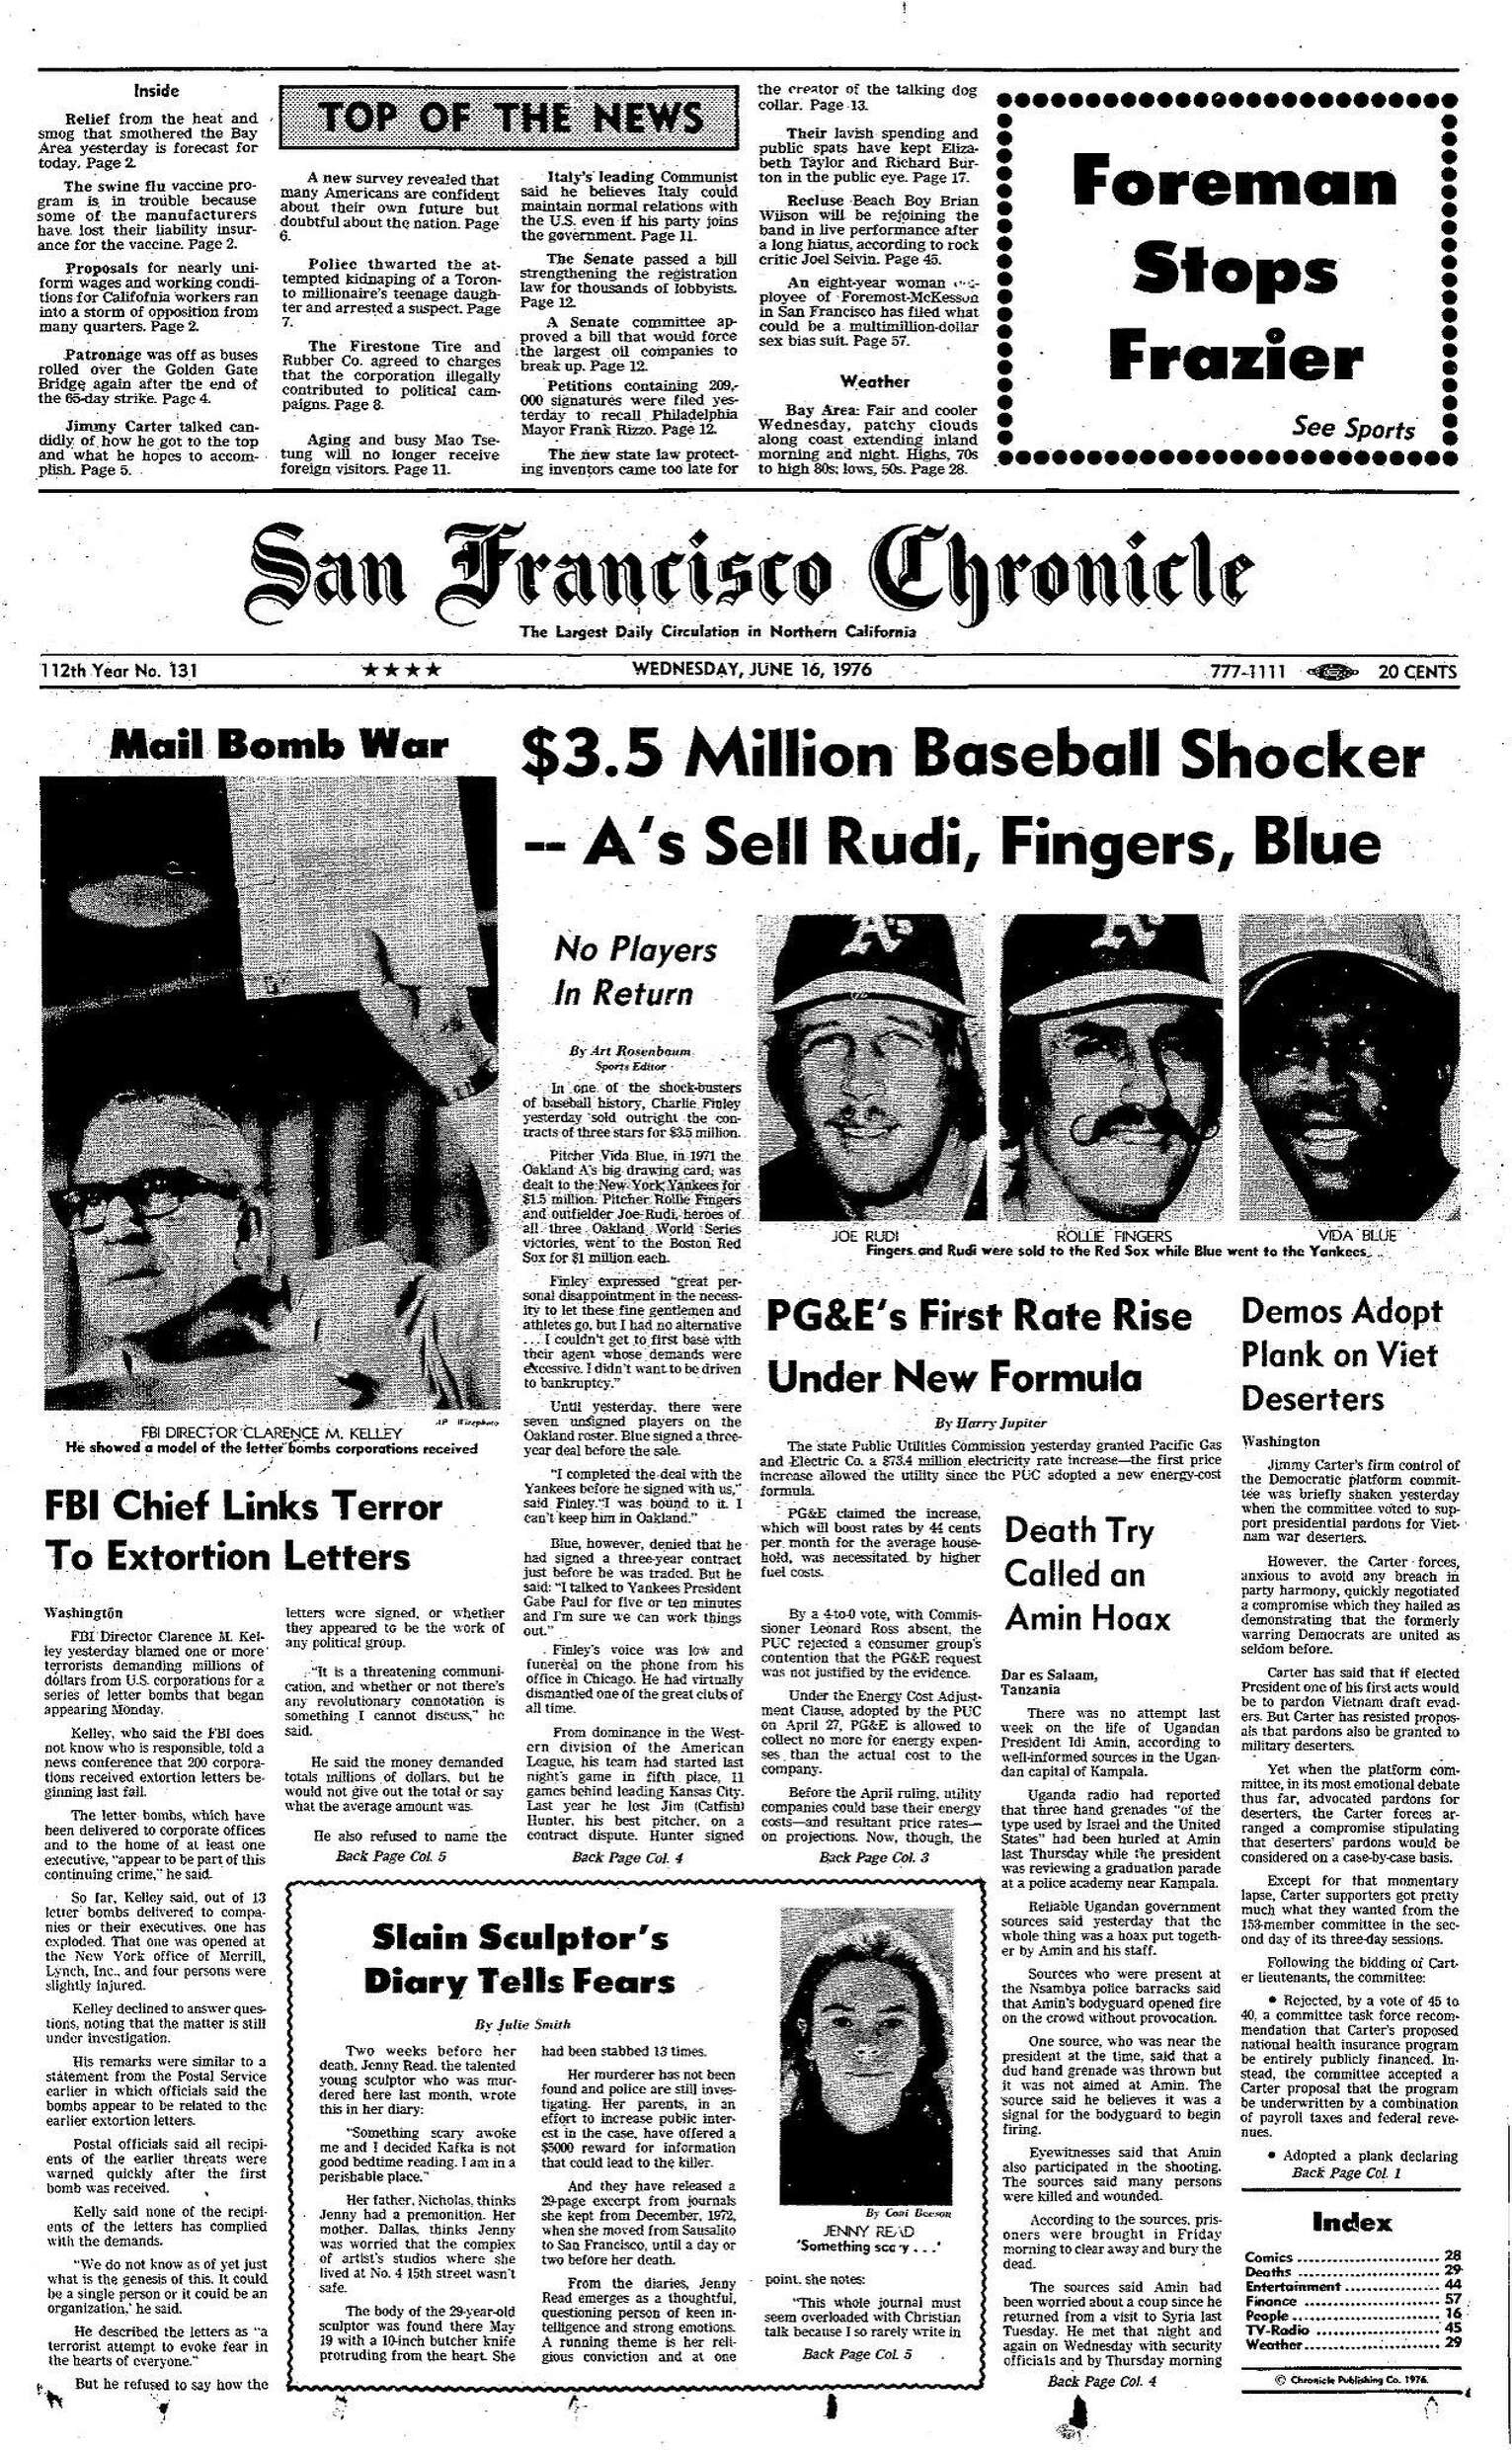 Chronicle Covers: When the A's tried to dismantle their best team ever